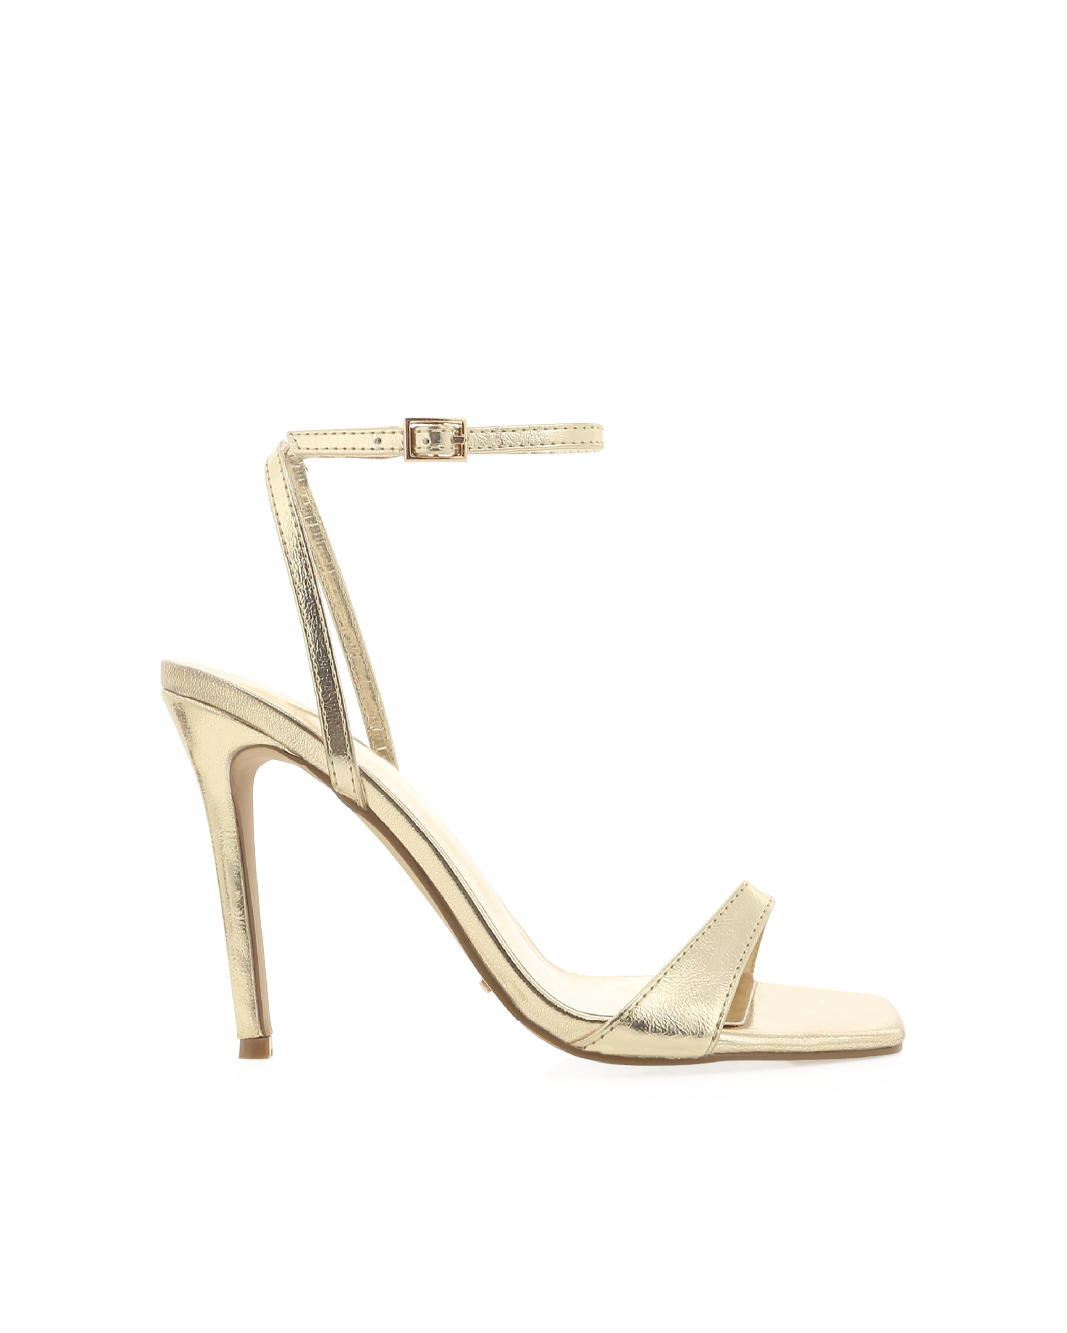 A main character moment for our dreamiest heel yet... Discover the IT Girl platform  heels this season ~ DREAMY Gold Metallic… | Instagram